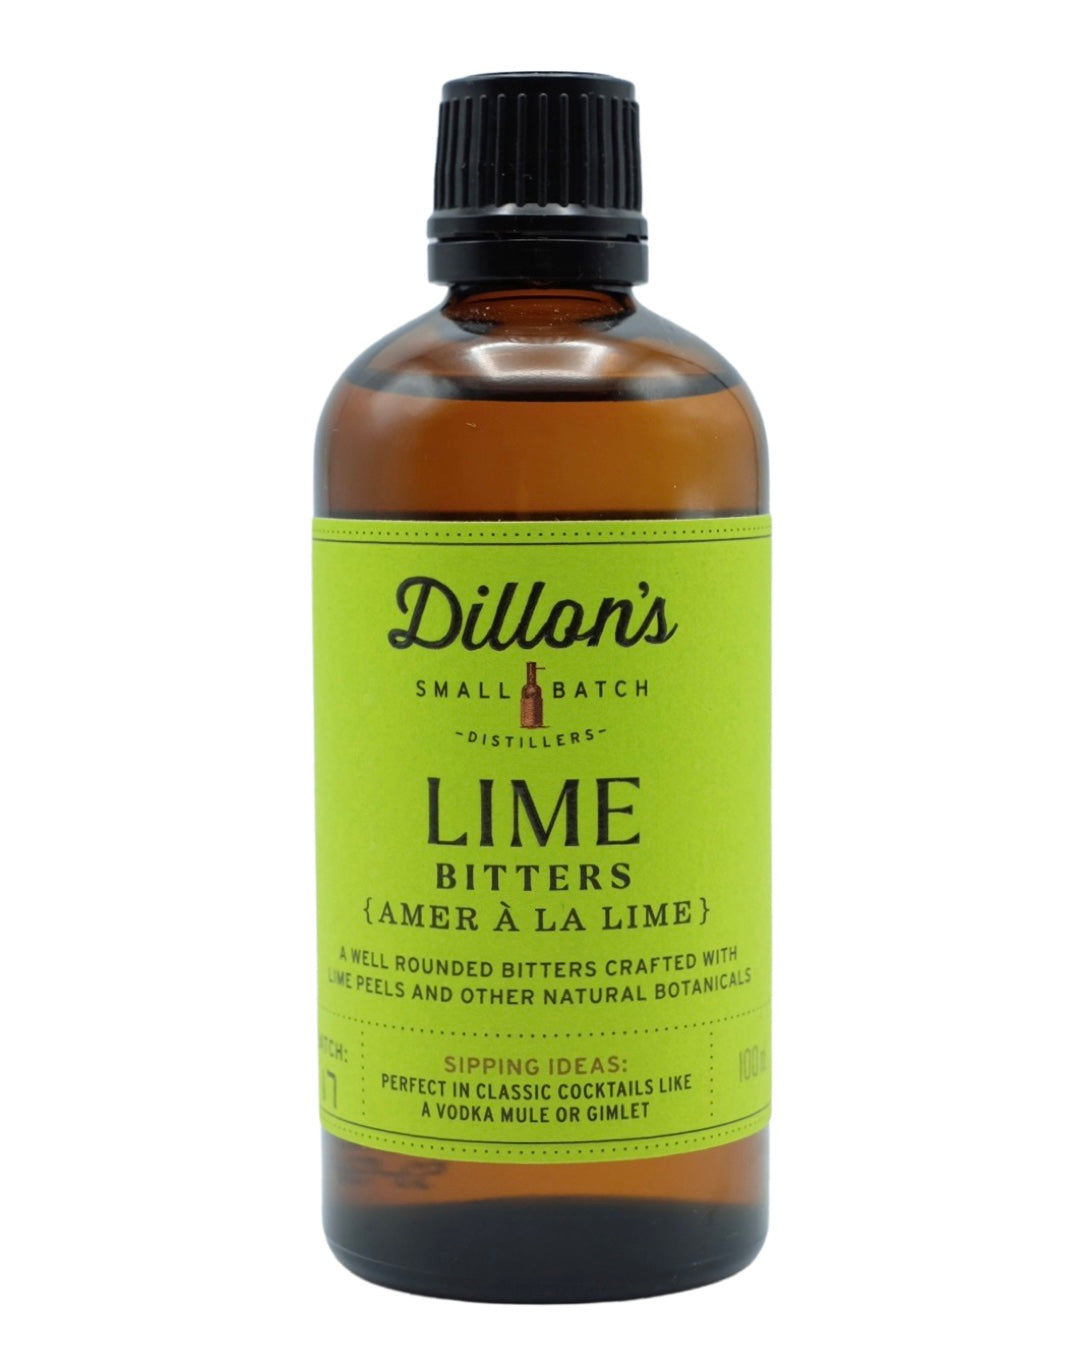 Dillon's Lime Bitters